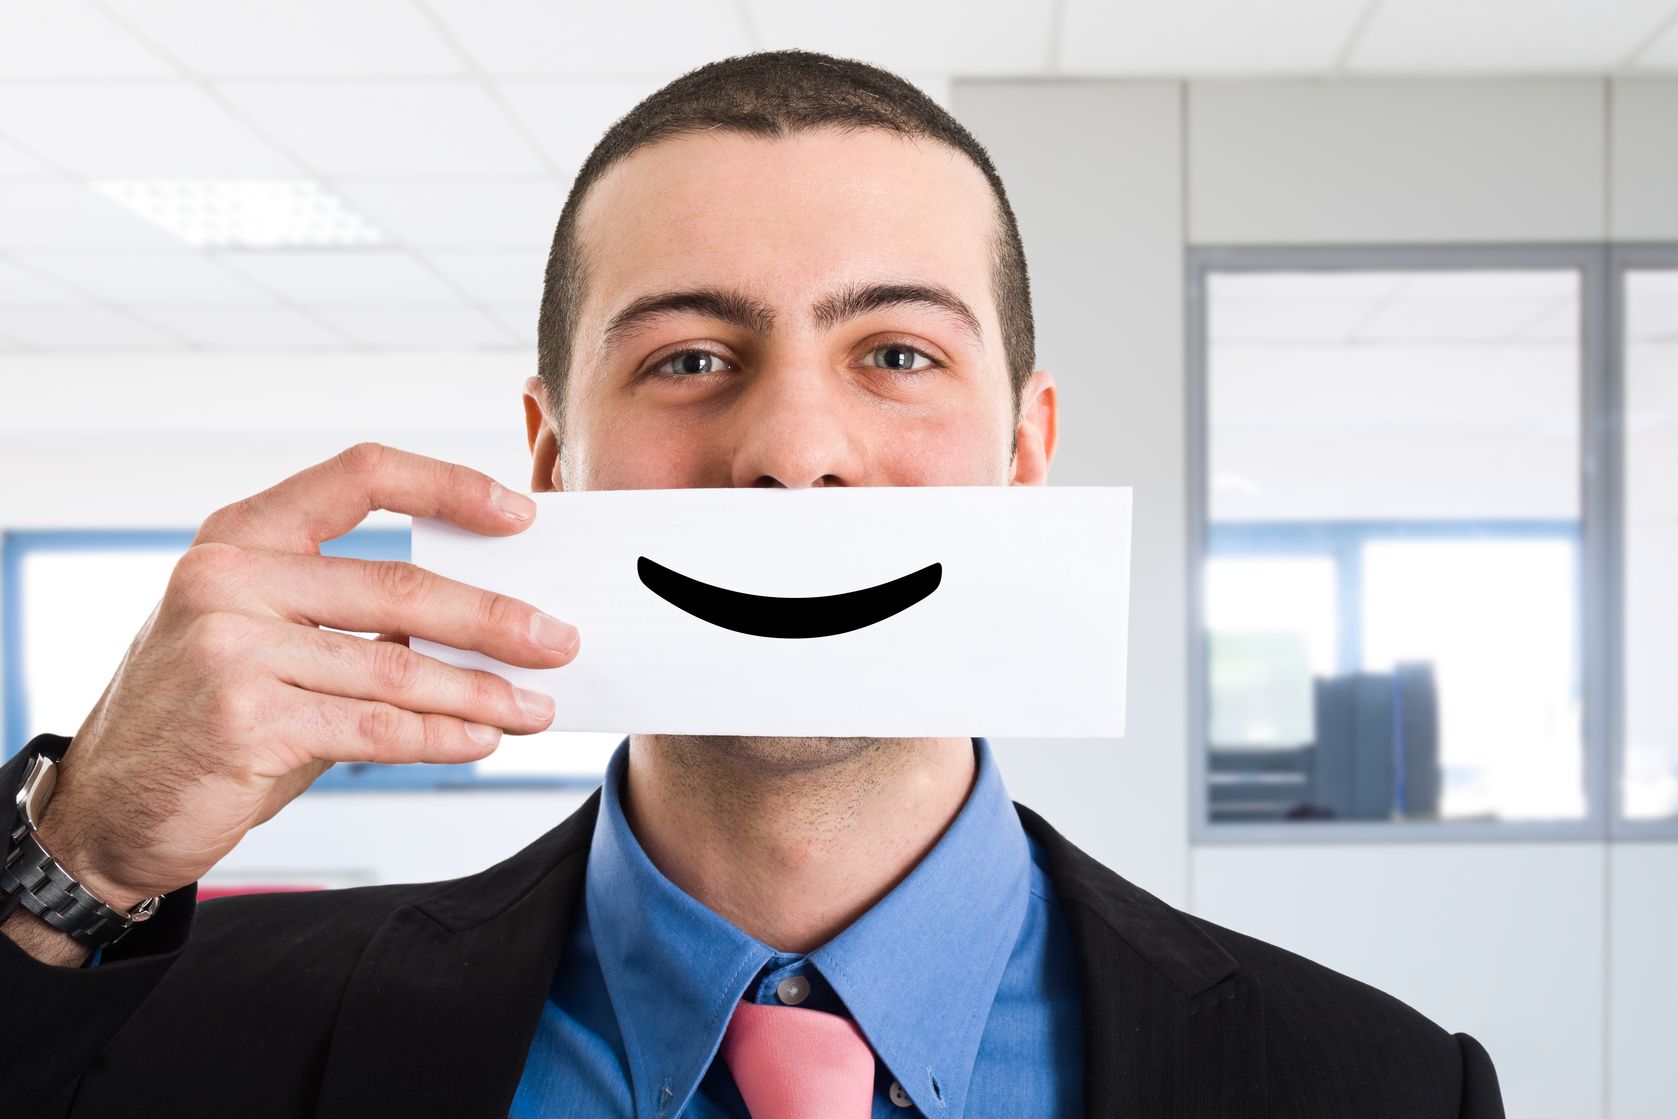 Customer Service Essential: Smiling Like You Mean It!